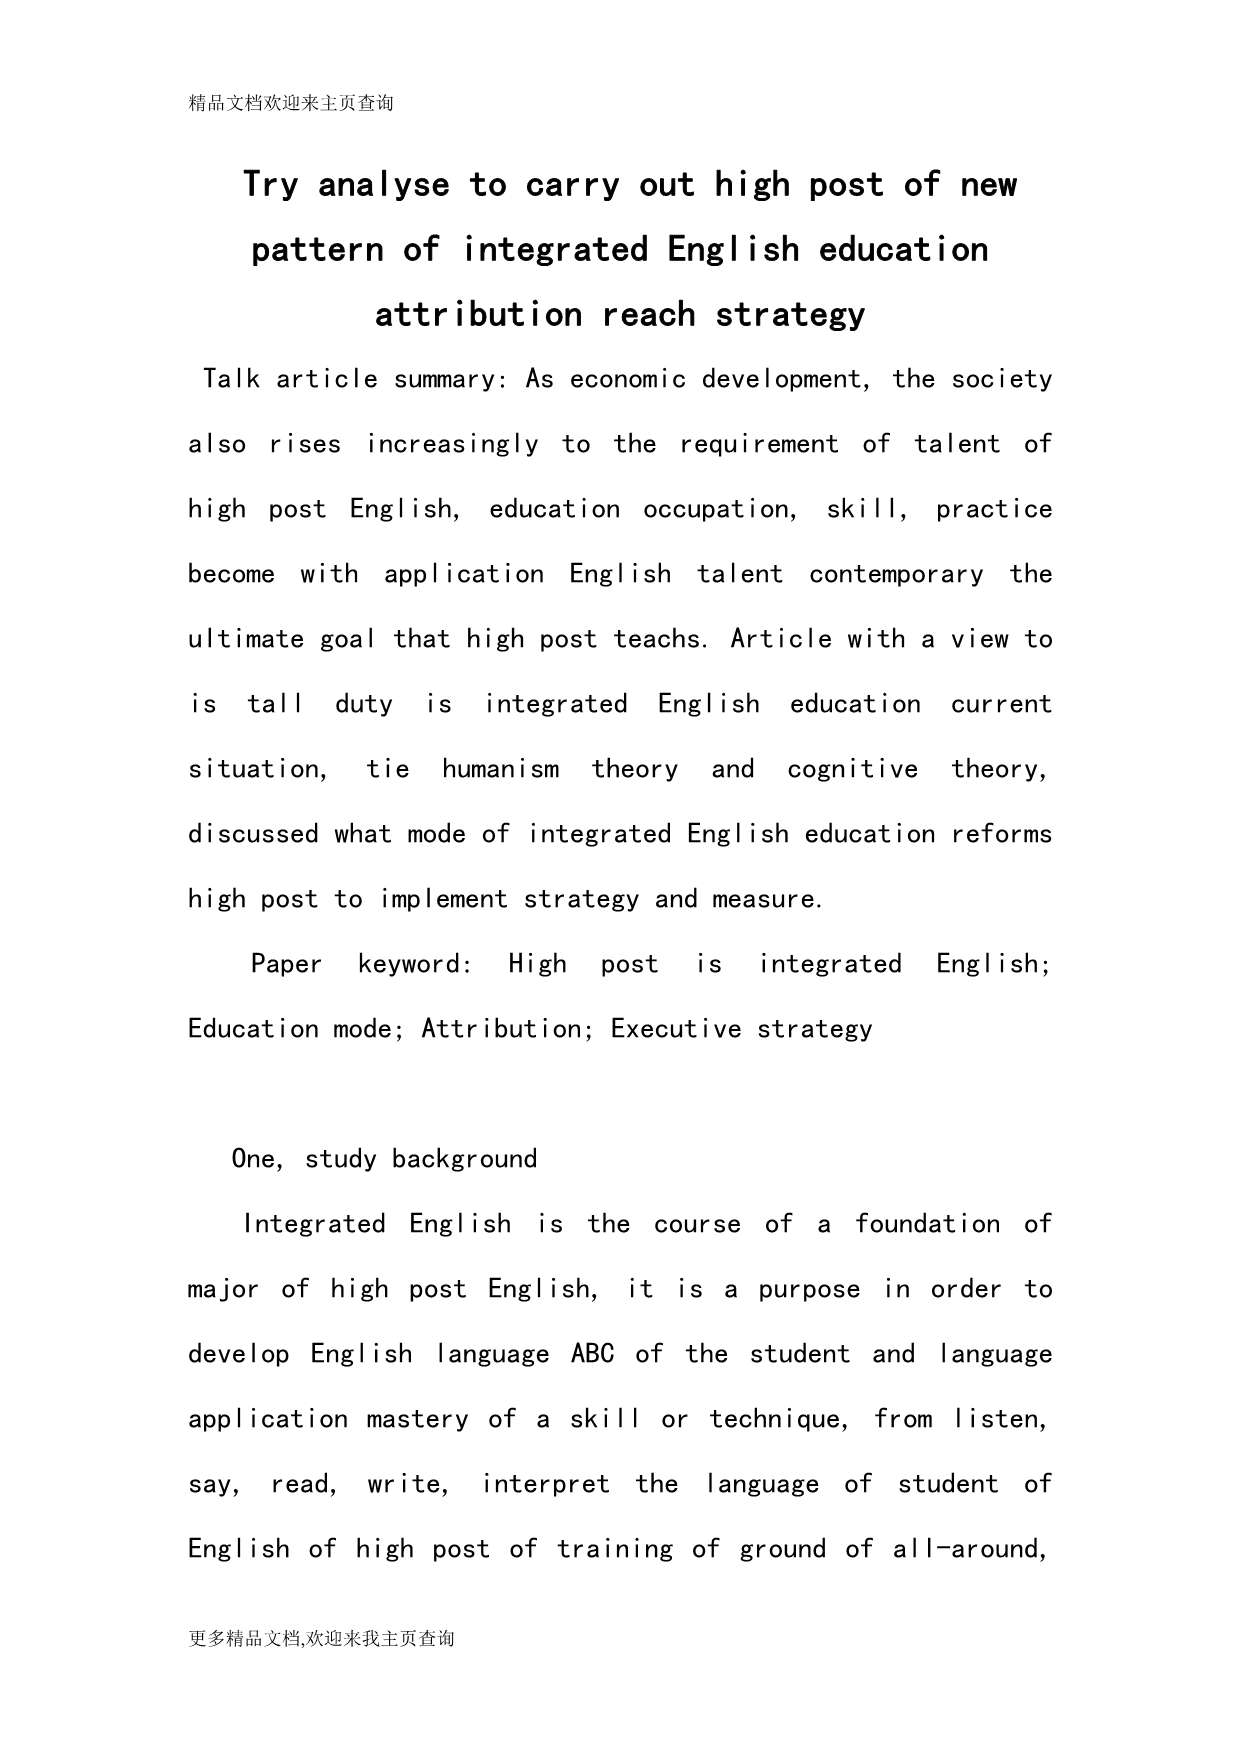 Try analyse to carry out high post of new pattern of integrated English education attribution reach strategy_第1页